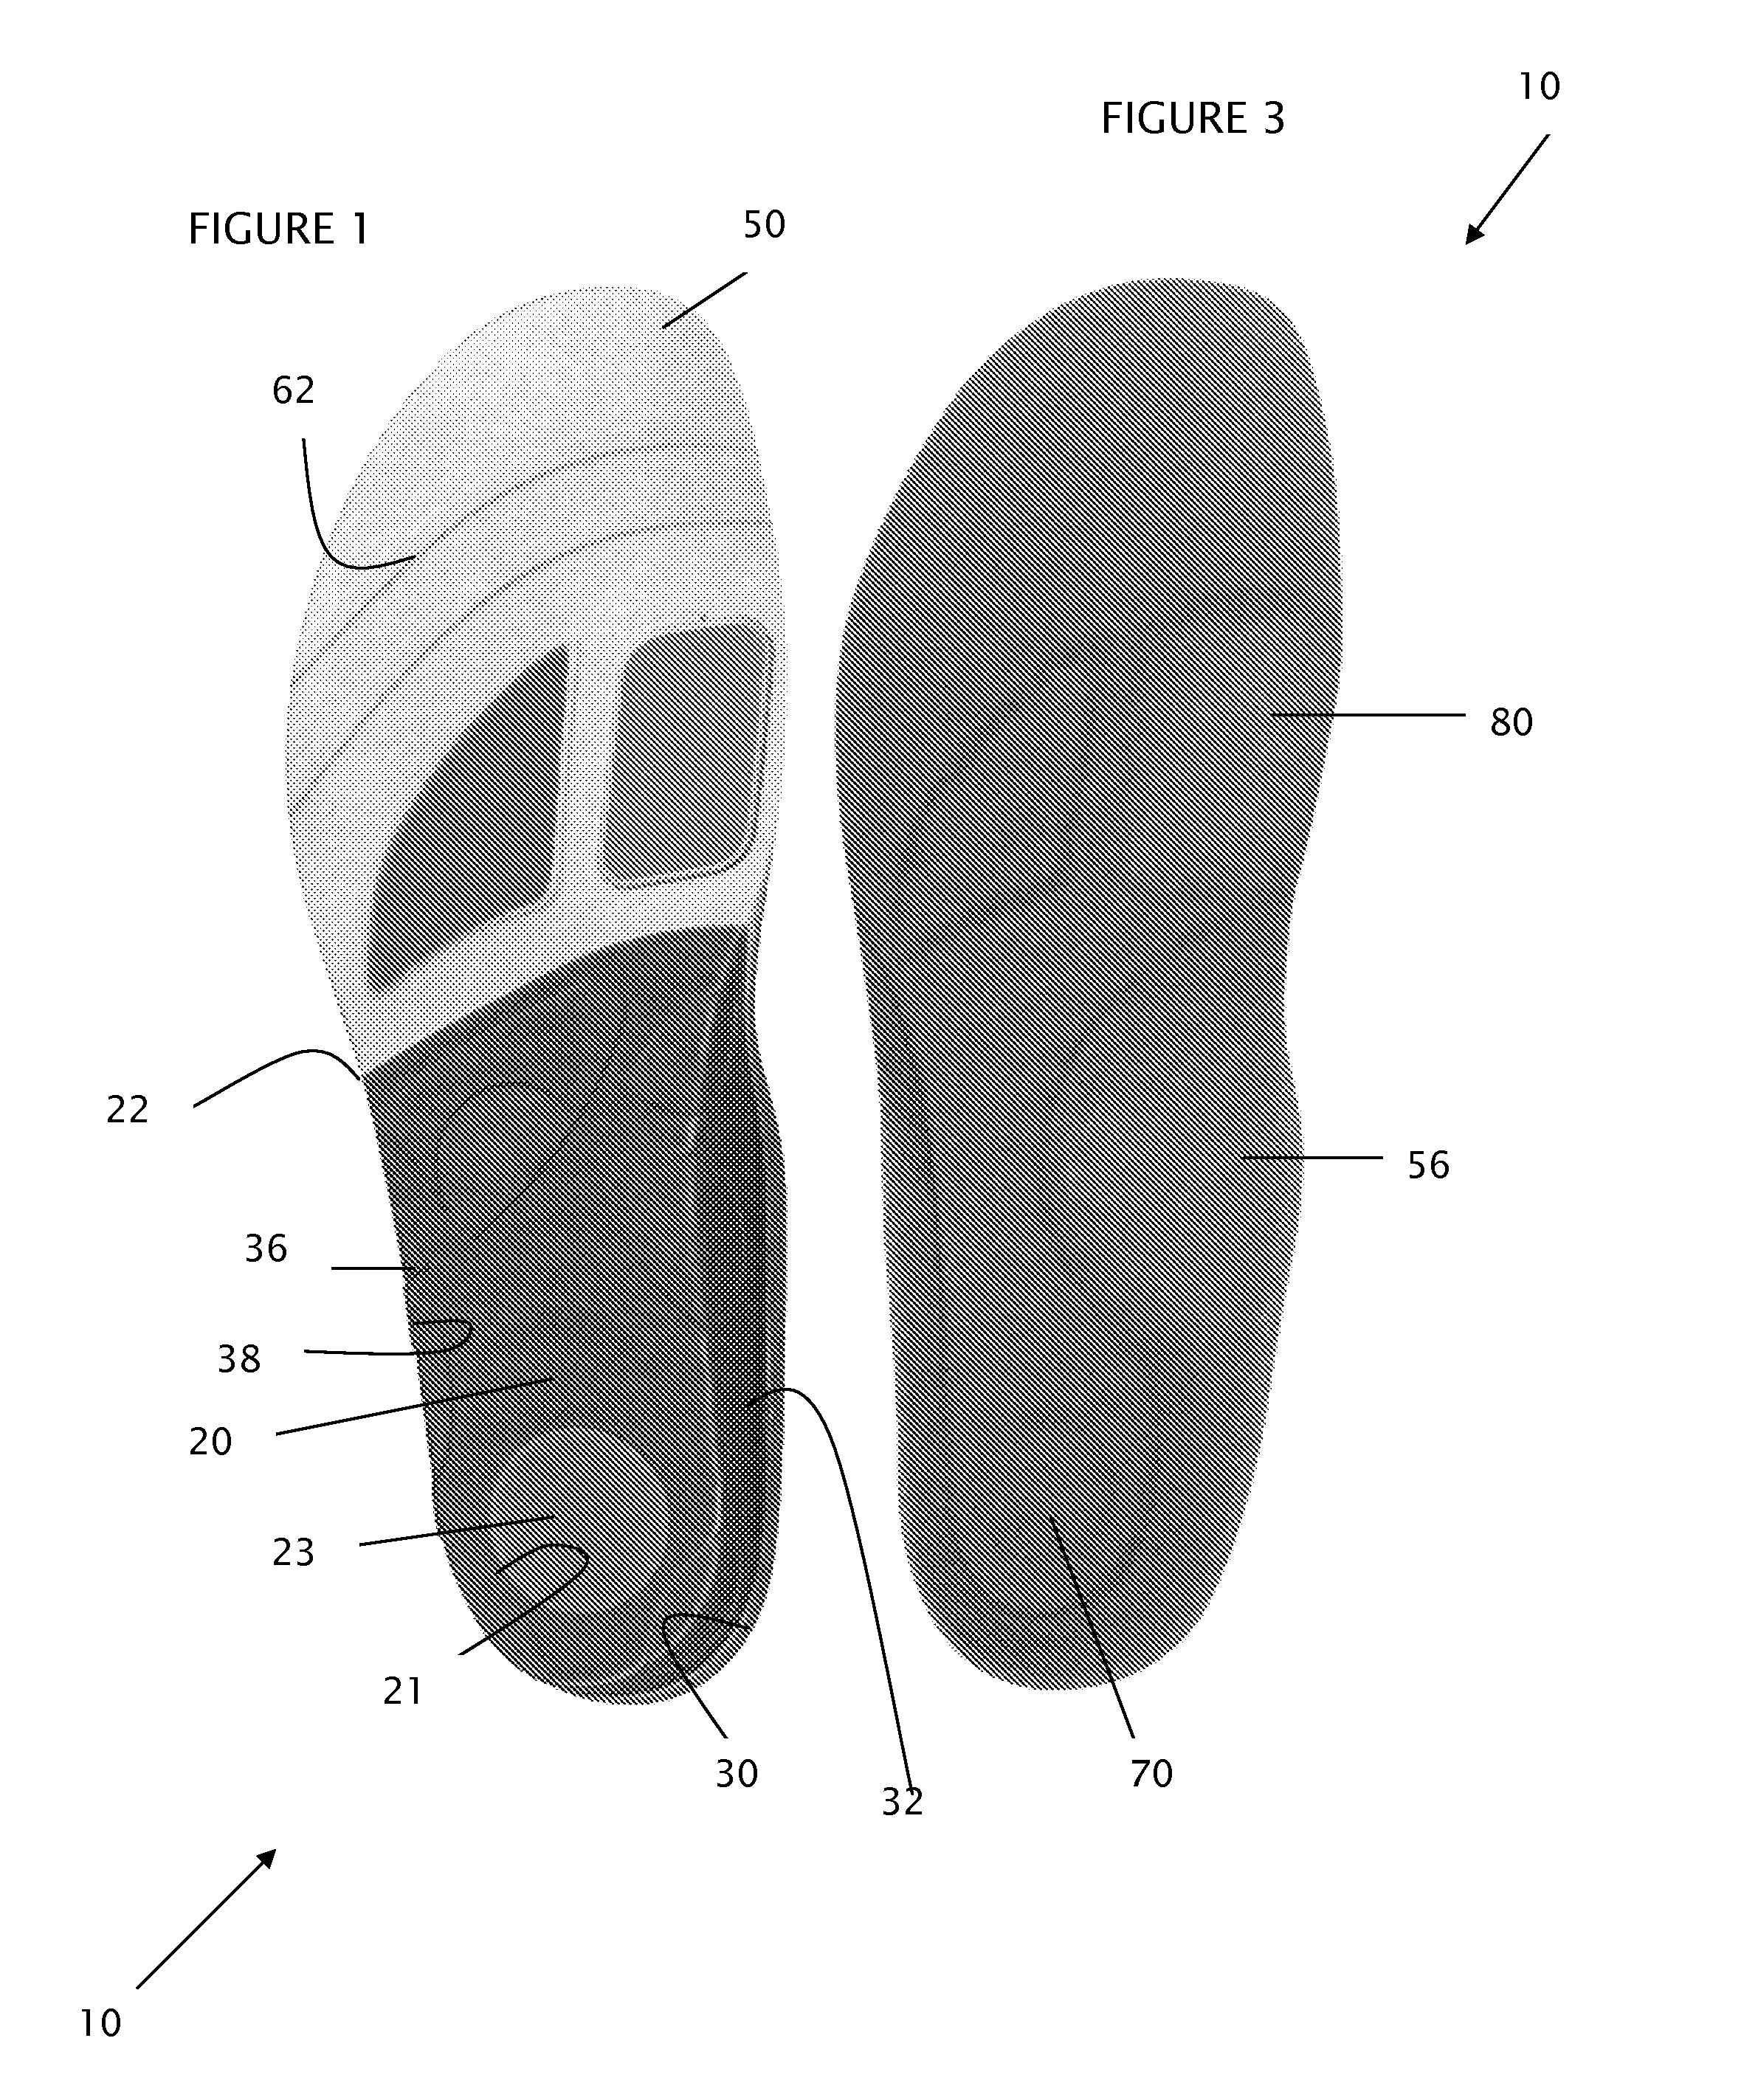 Orthotic insole assembly